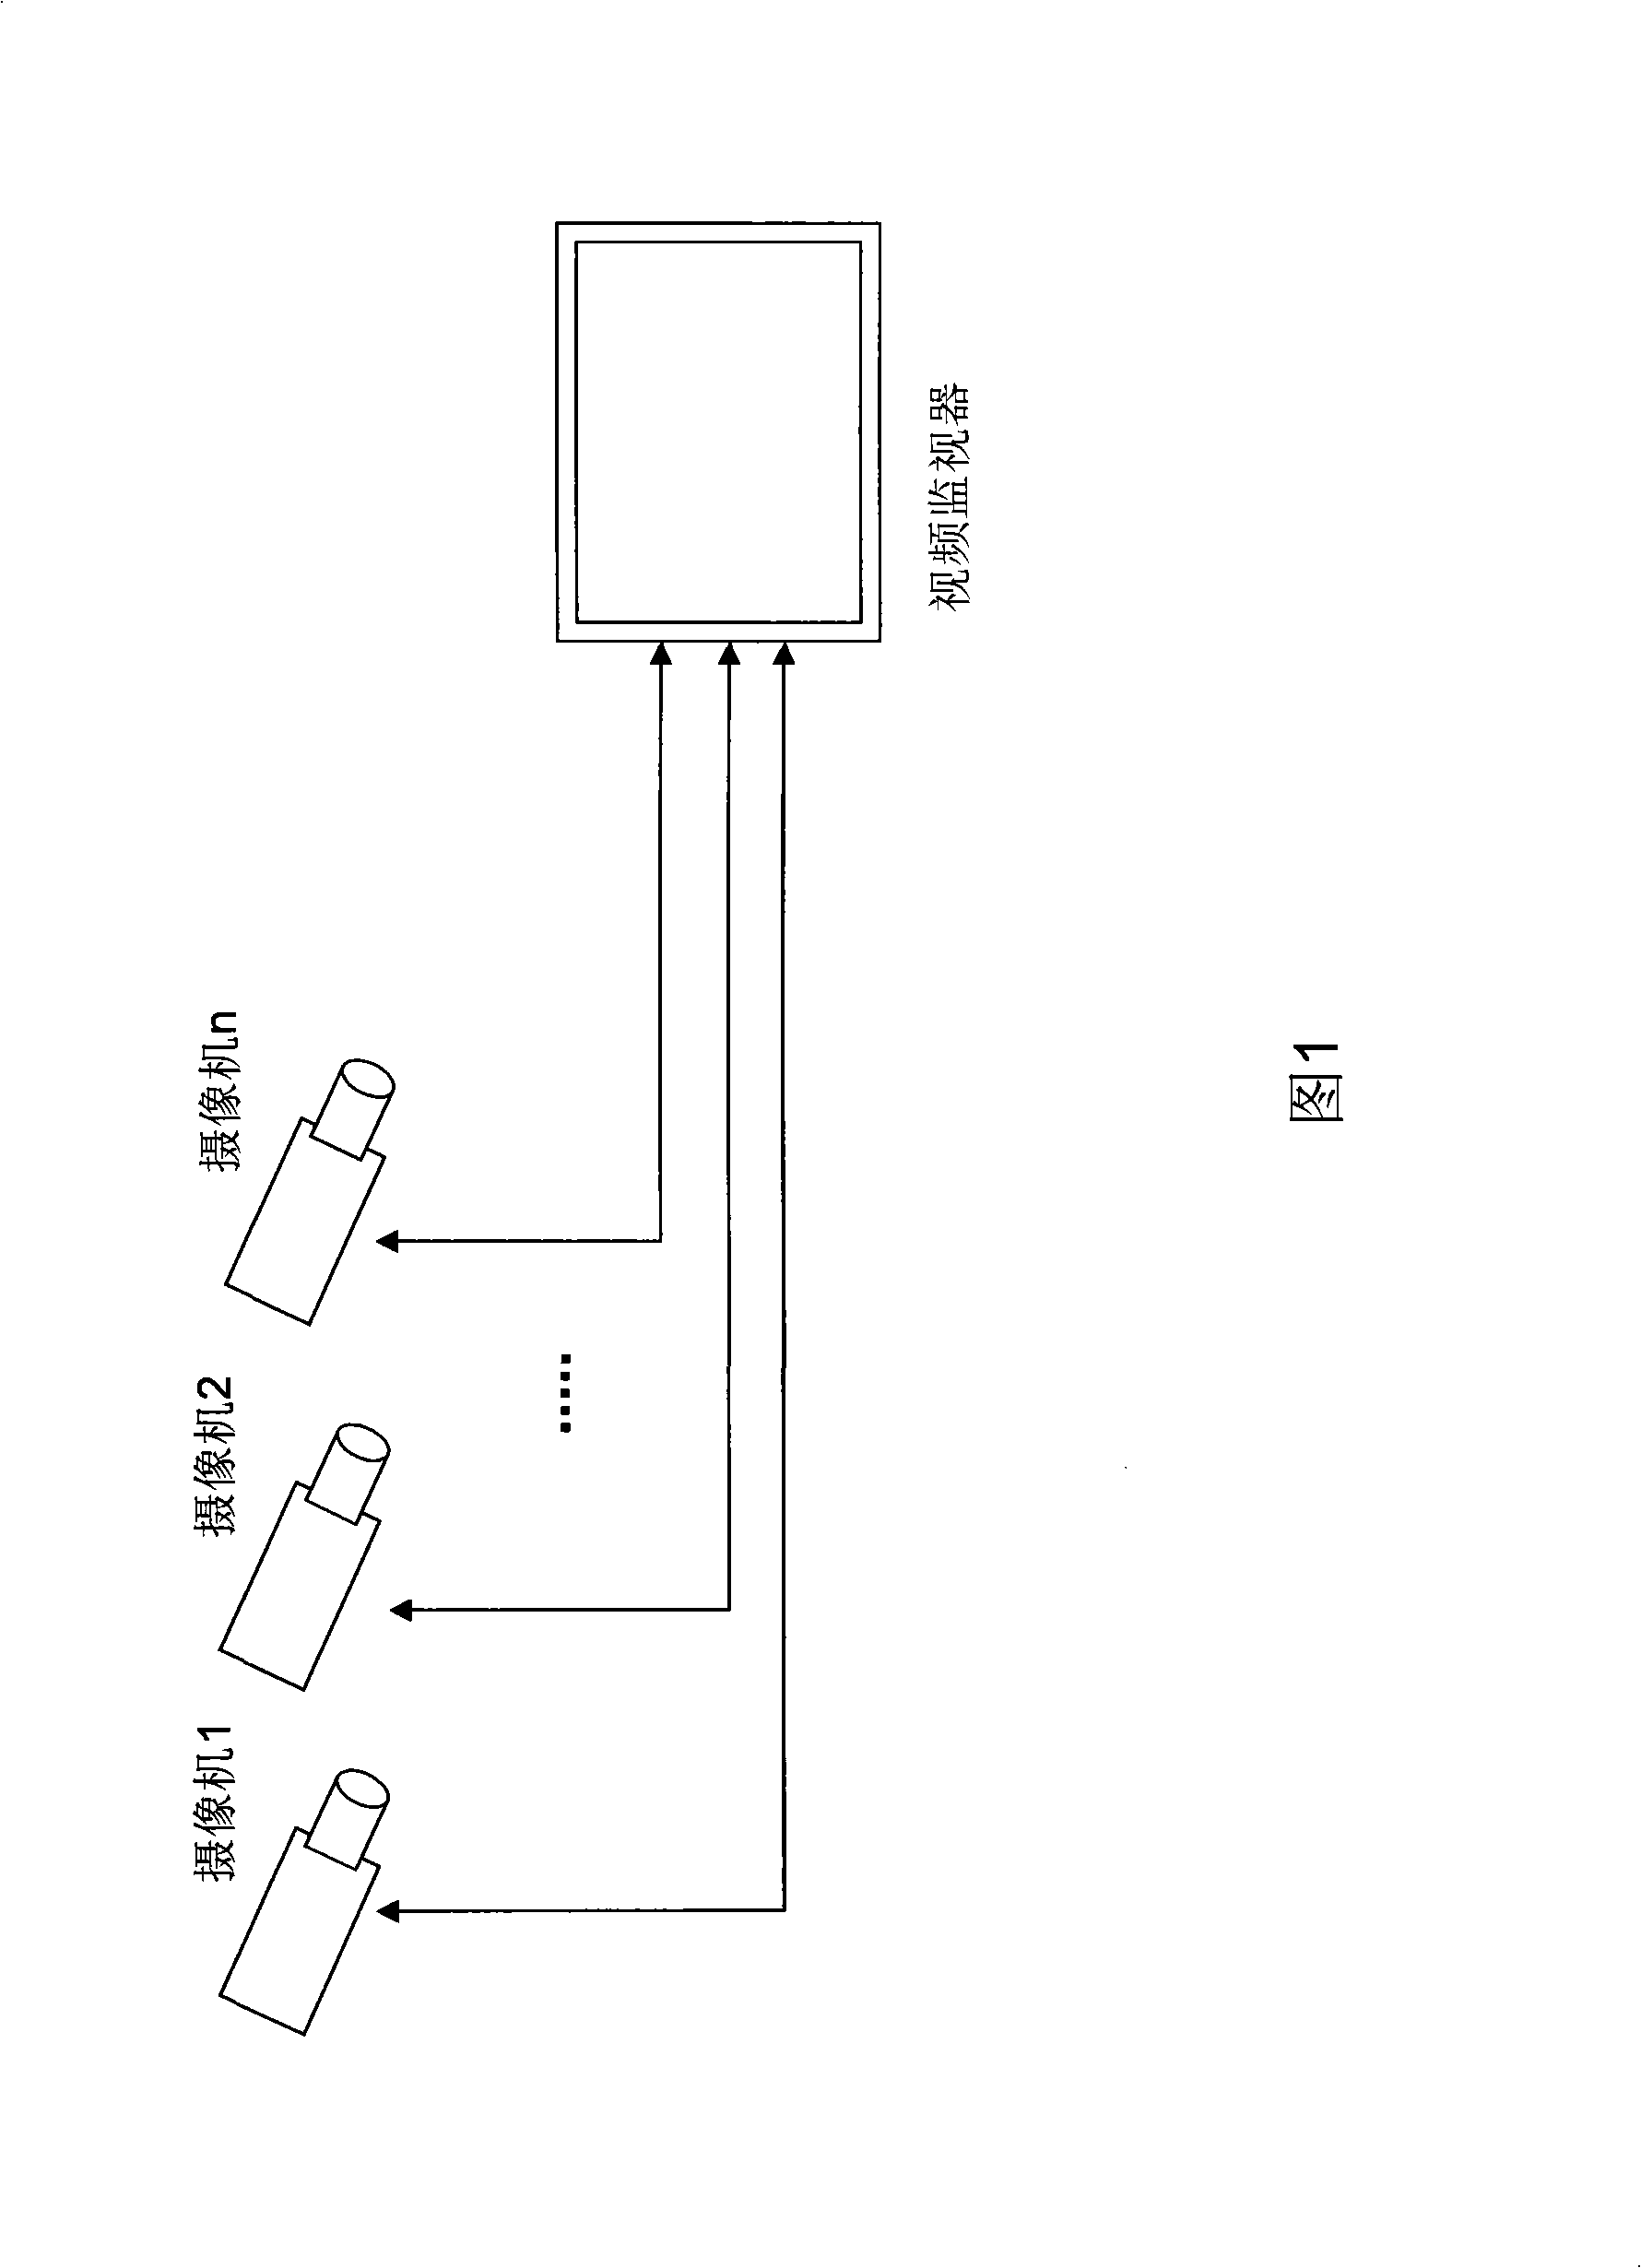 Panoramic video monitoring system and method with perspective automatically configured